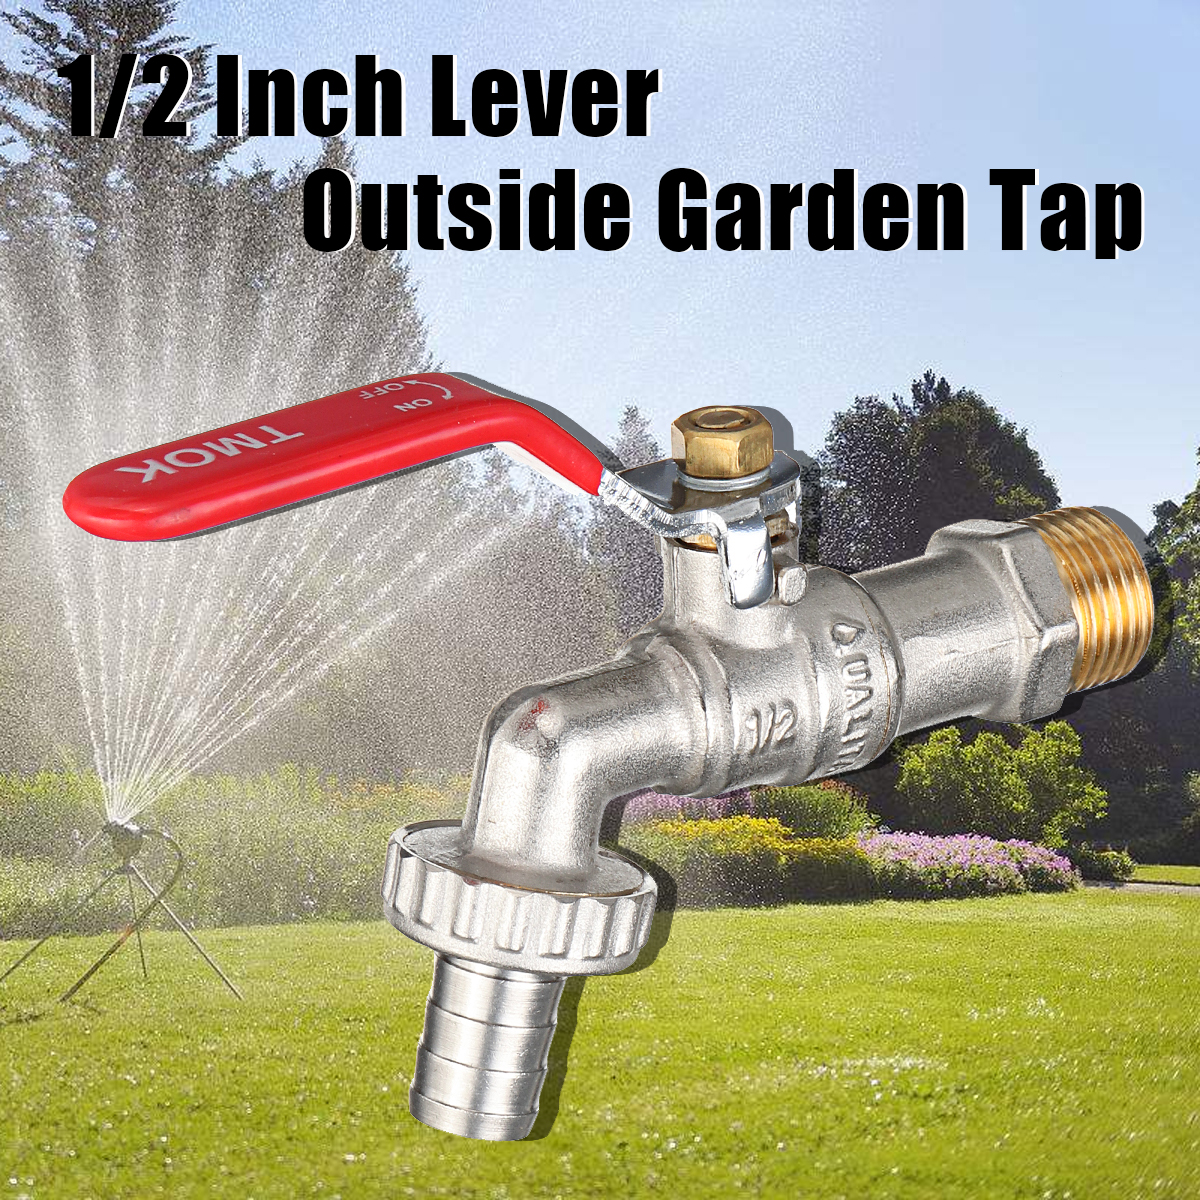 TMOK-12-Inch-Lever-Outside-Garden-Tap-Easy-Quarter-Turn-Off-On-Manual-Long-Handle-Faucet-1320395